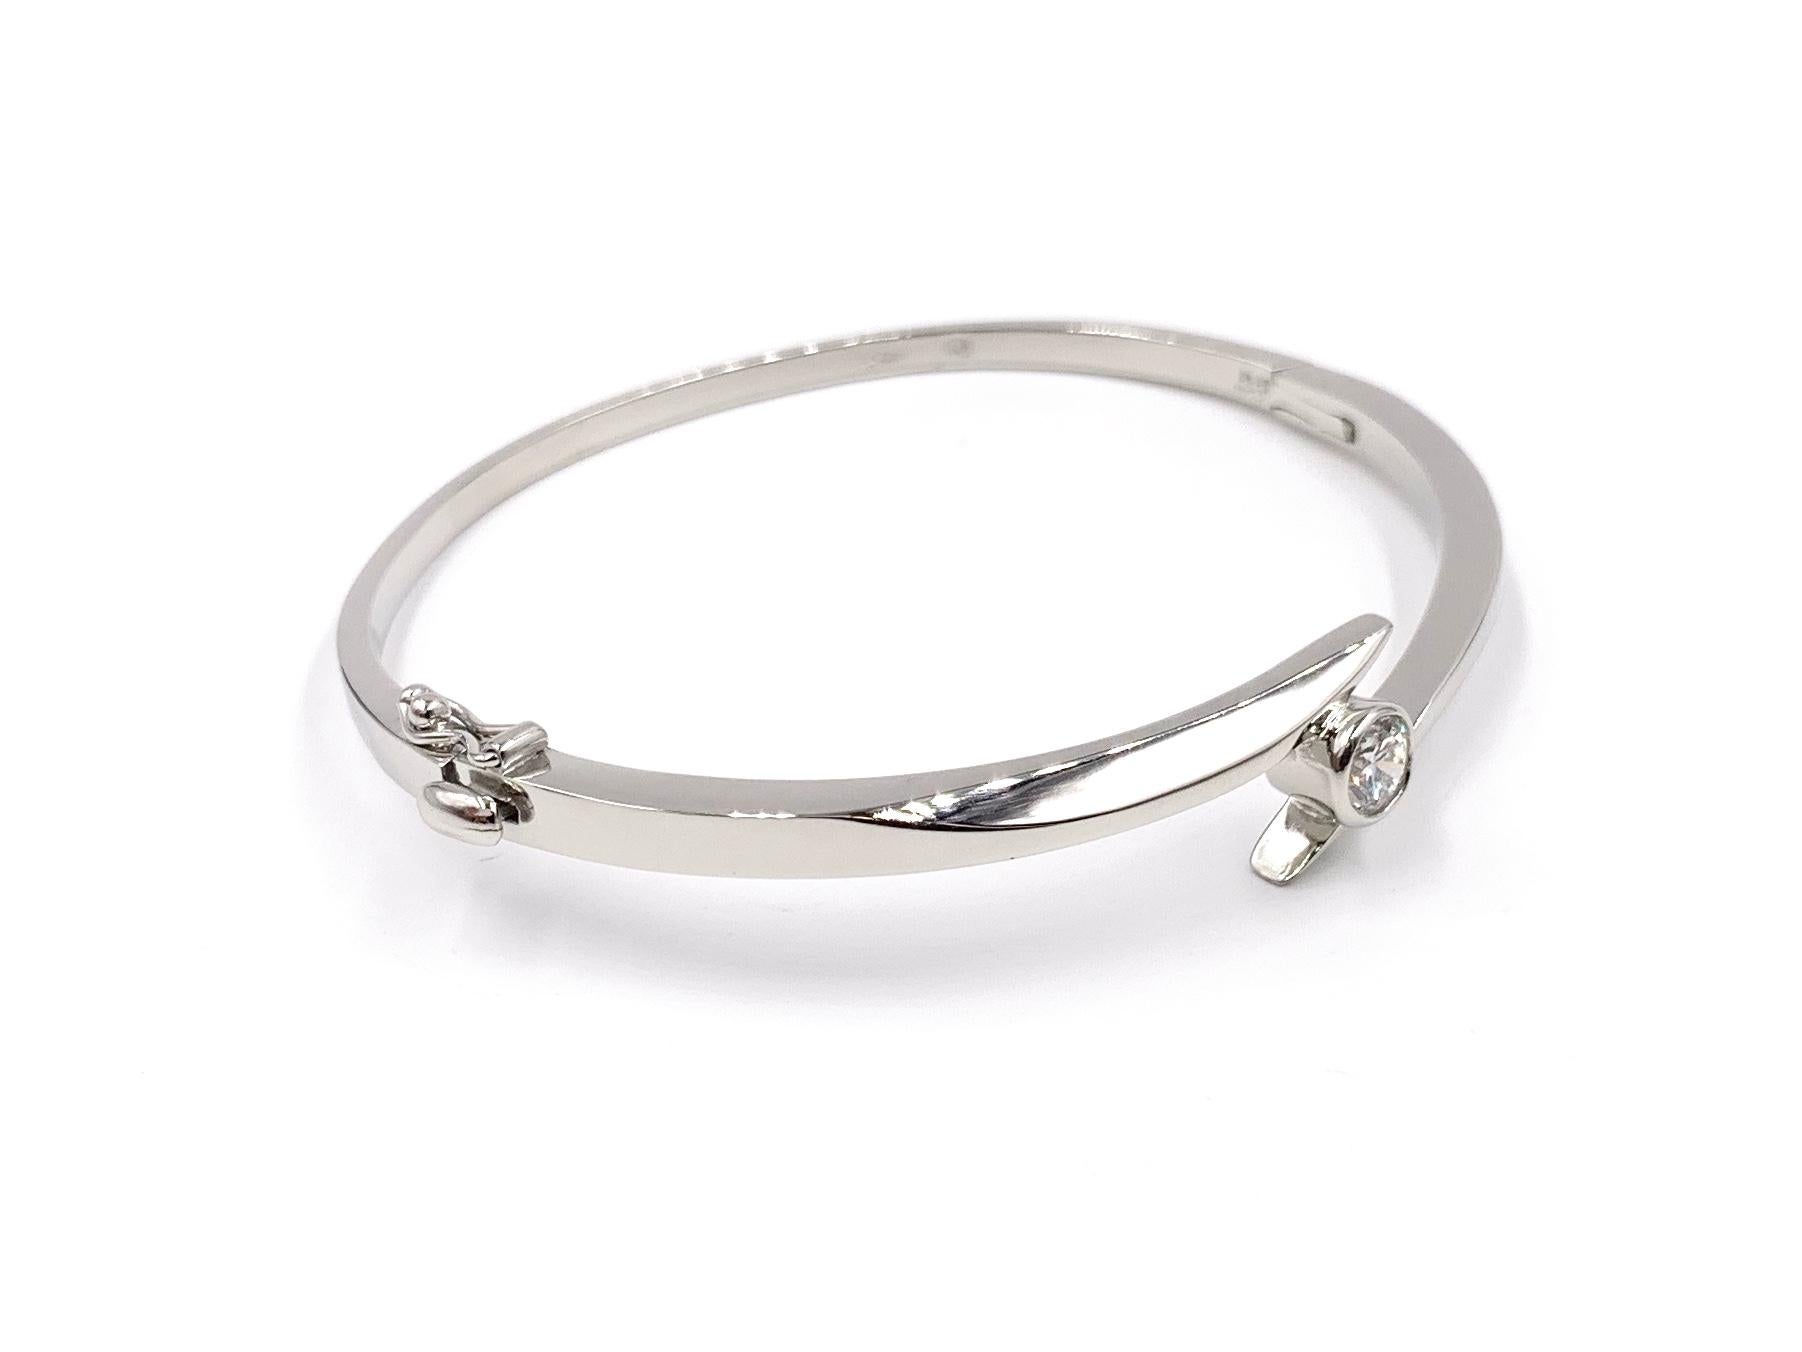 Great for stacking or wearing by itself! A wearable and classic polished platinum bangle bracelet featuring an approximate .50 carat round brilliant diamond at approximately G color, SI1 clarity (eye clean). Bangle is fitted with a push-button clasp